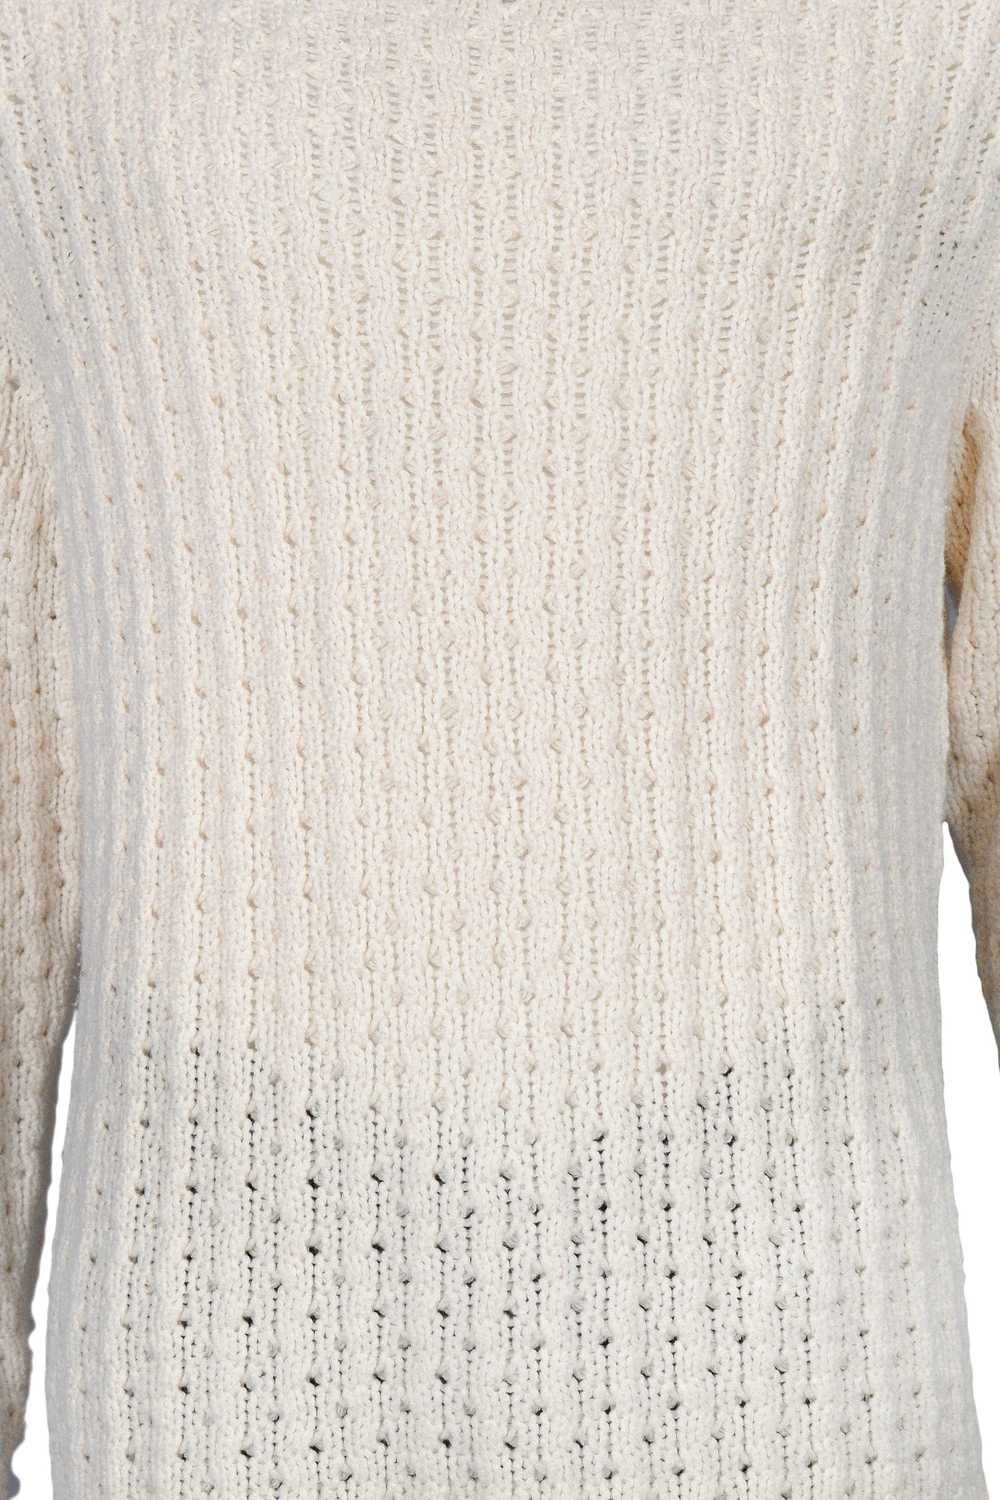 HELMUT LANG OFF WHITE KNIT SWEATER - image 4